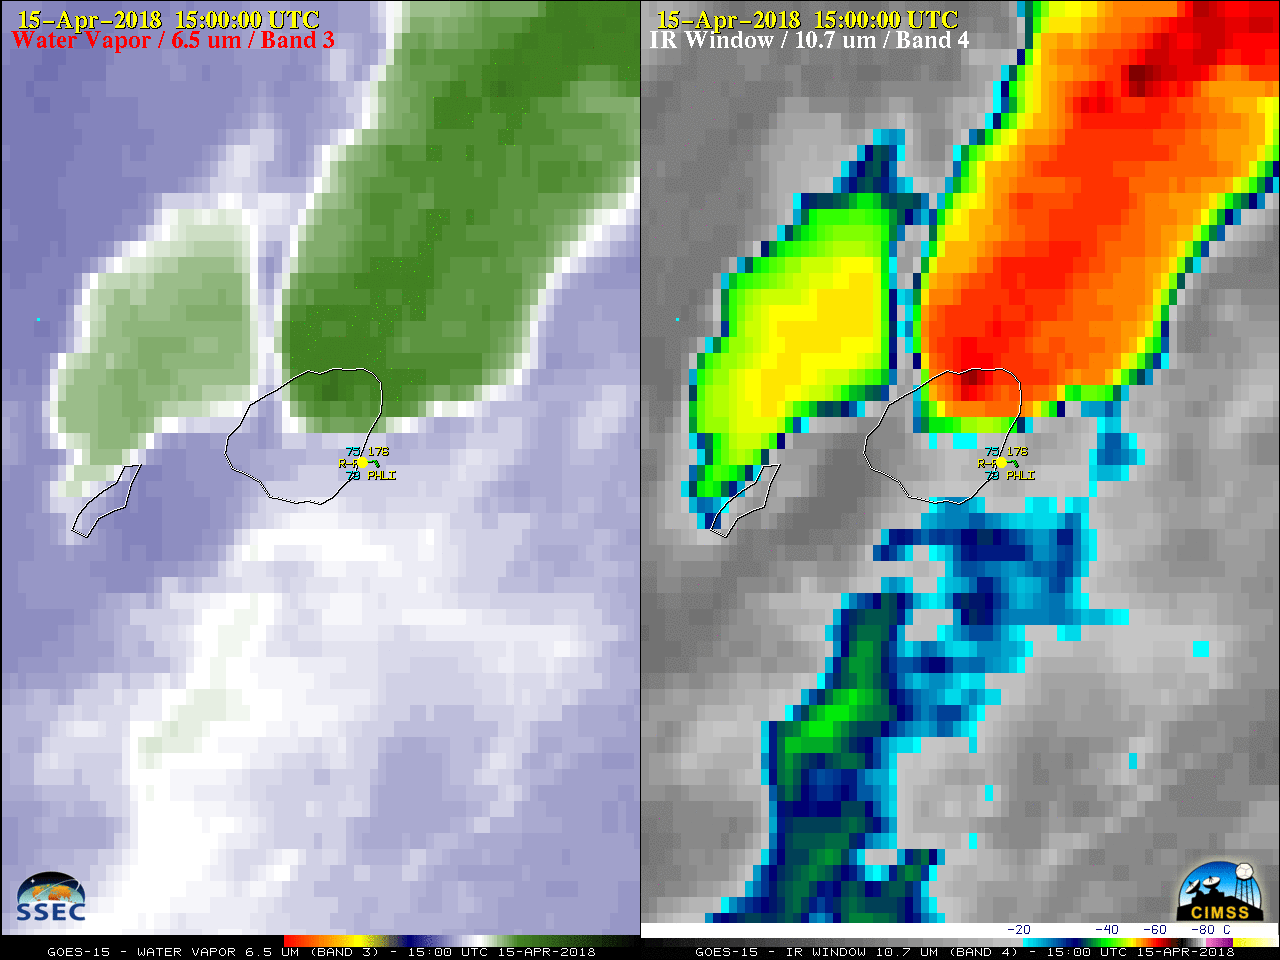 GOES-15 Water Vapor (6.5 µm, left) and Infrared Window (10.7 µm, right) images, with hourly plots of surface reports [click to play MP4 animation]